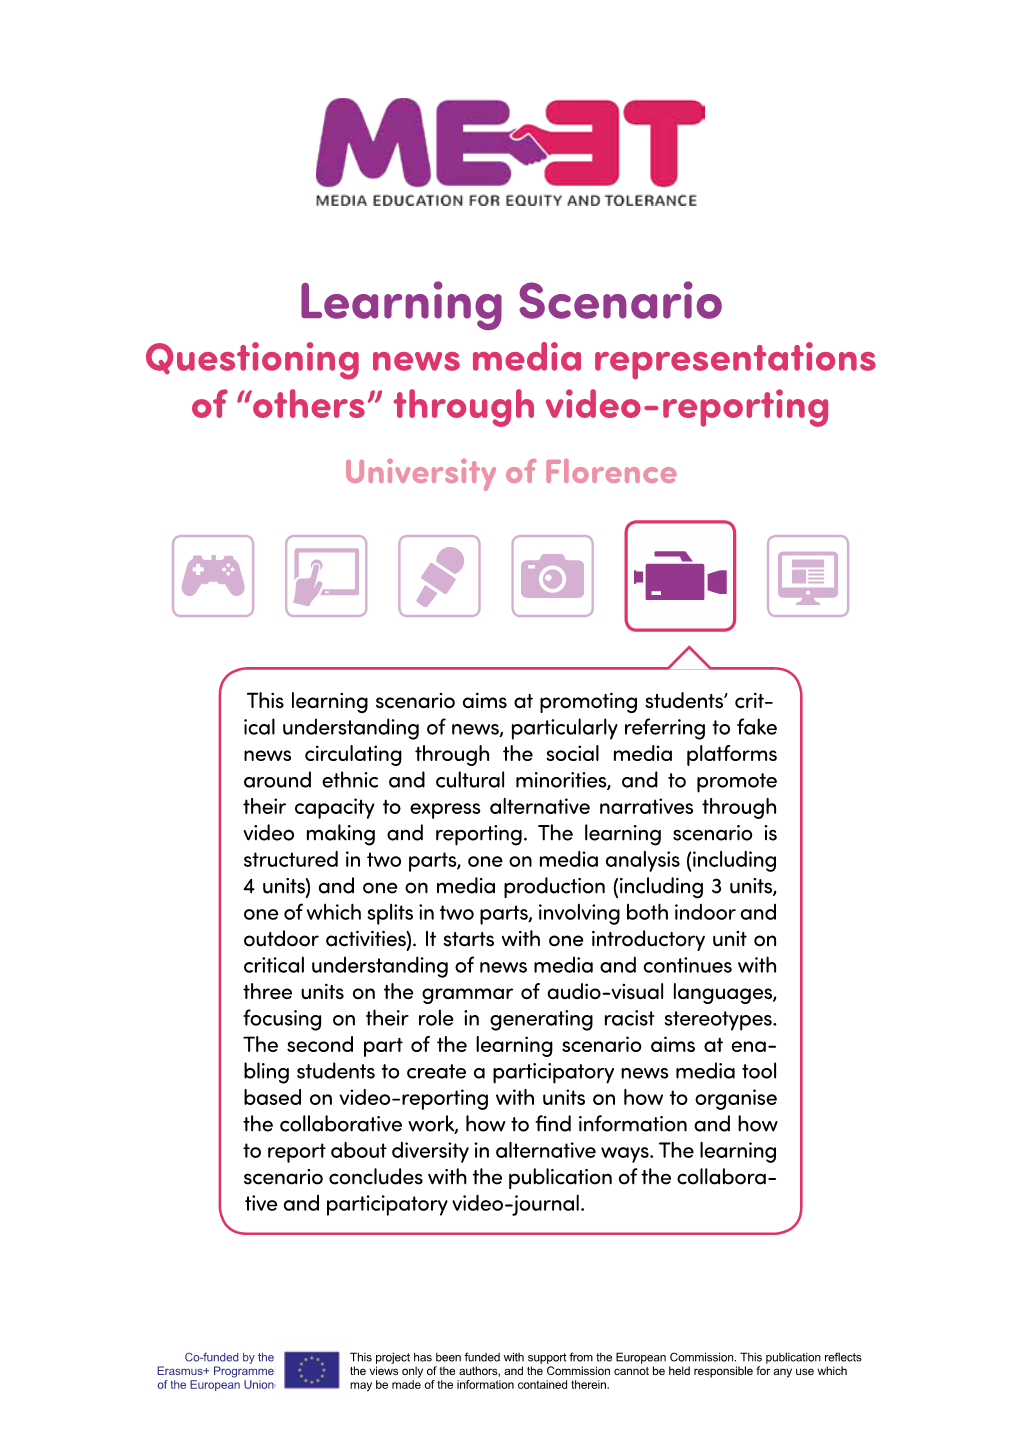 Learning Scenario Questioning News Media Representations of “Others” Through Video-Reporting University of Florence